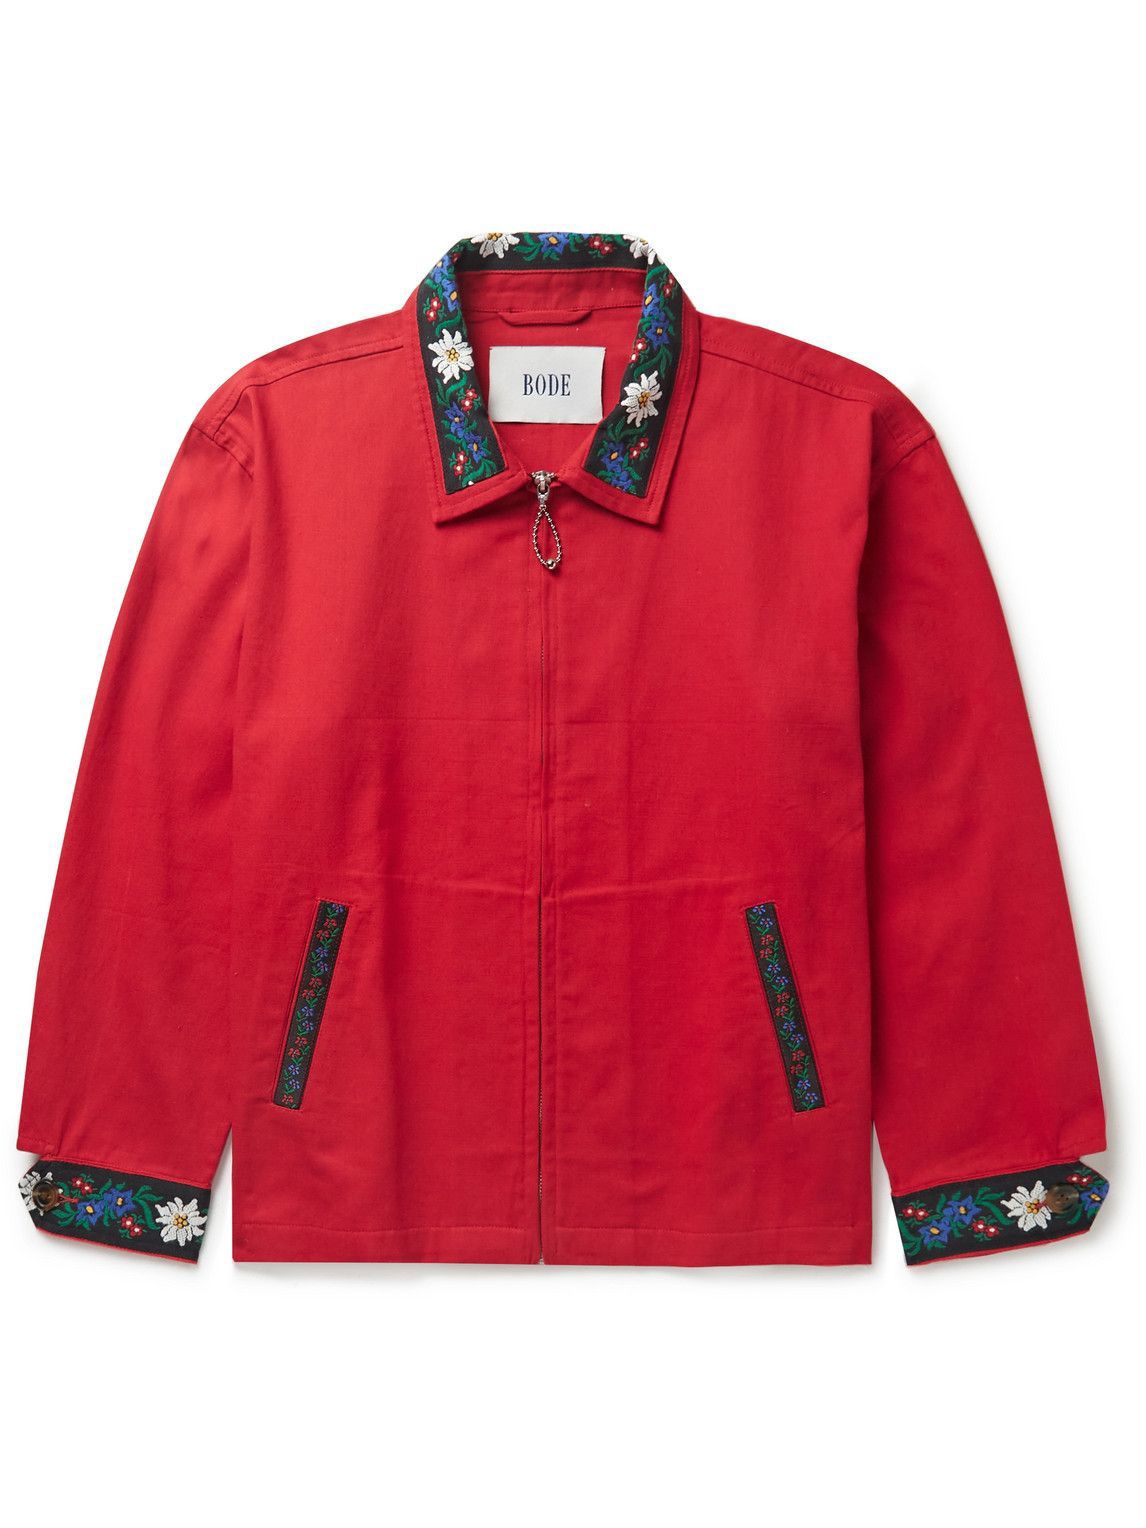 BODE - Alpine Embroidered Cotton-Twill Jacket - Red Bode